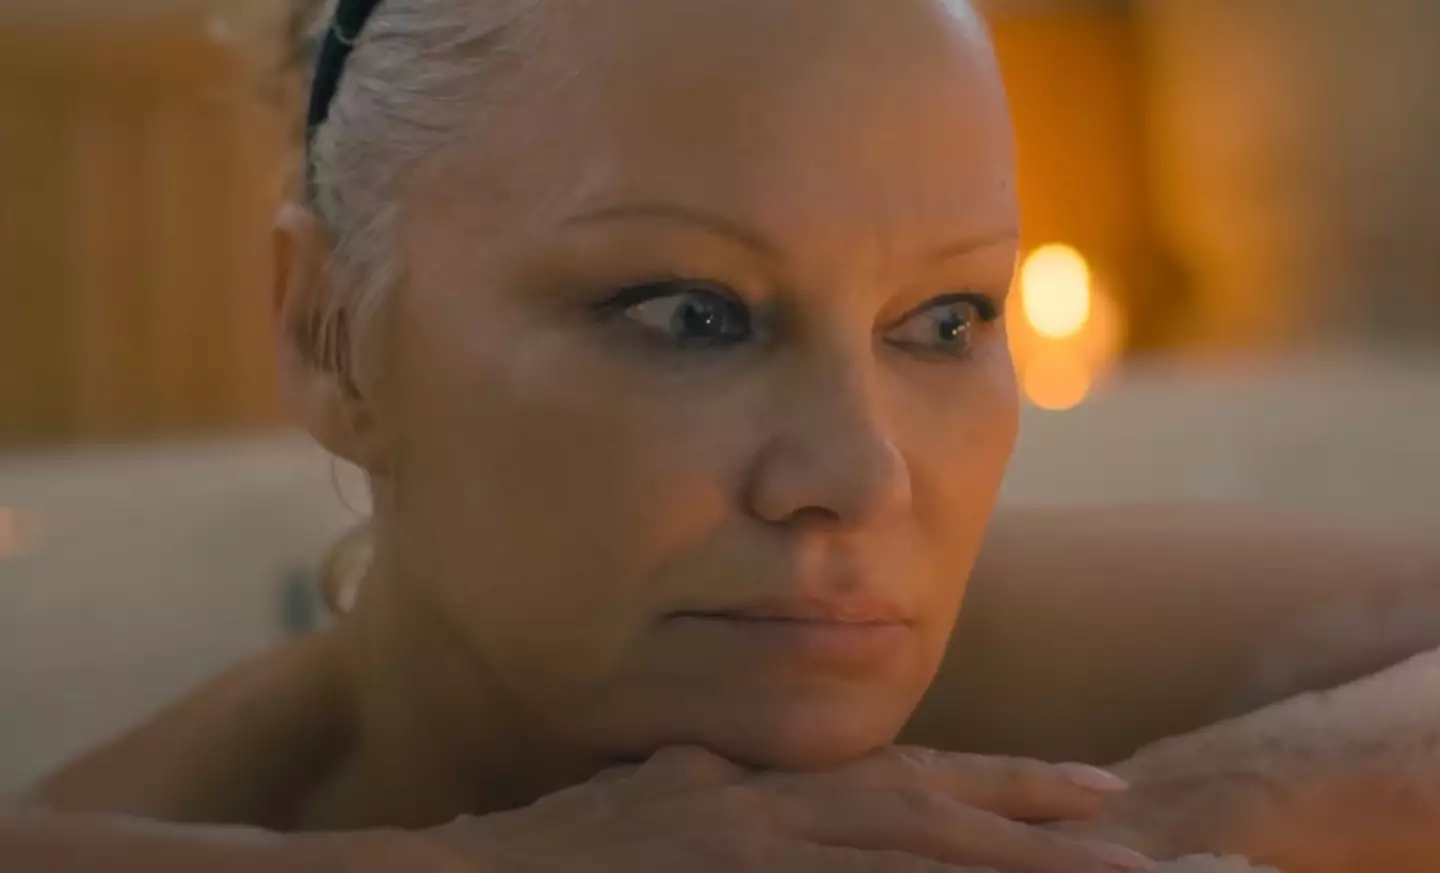 Pamela Anderson is set to open up in a new documentary.